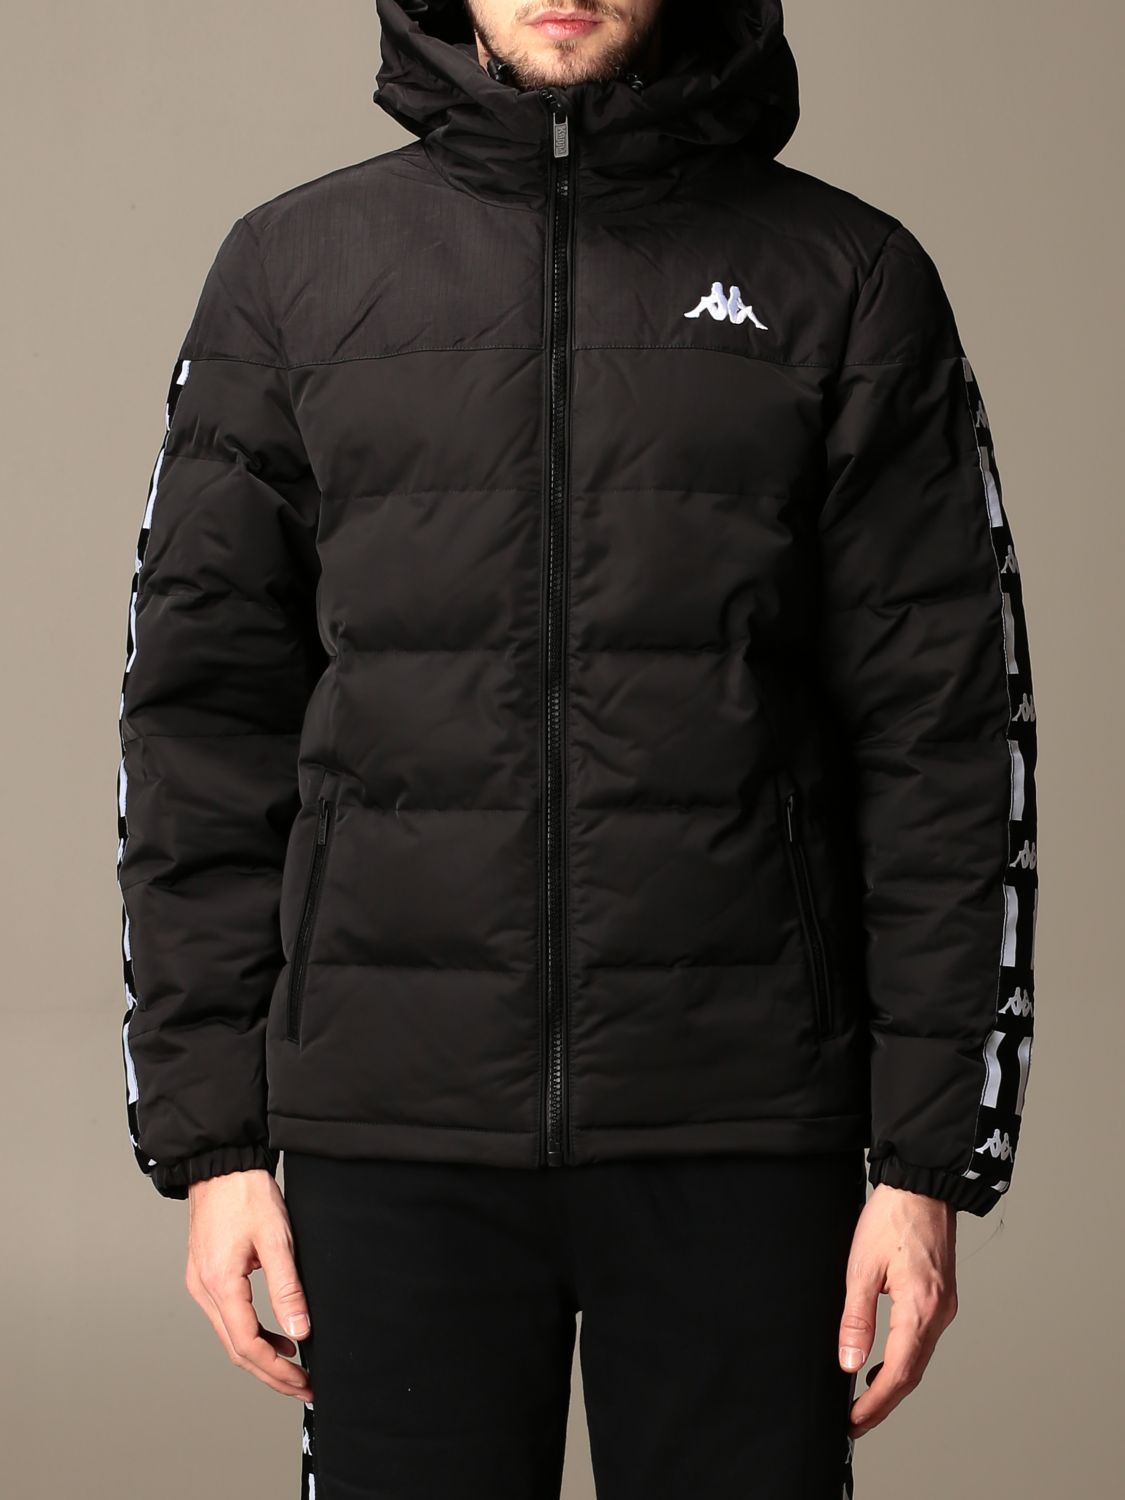 KAPPA: Authentic USA down jacket in padded nylon - Black | jacket 31113ZW online on GIGLIO.COM